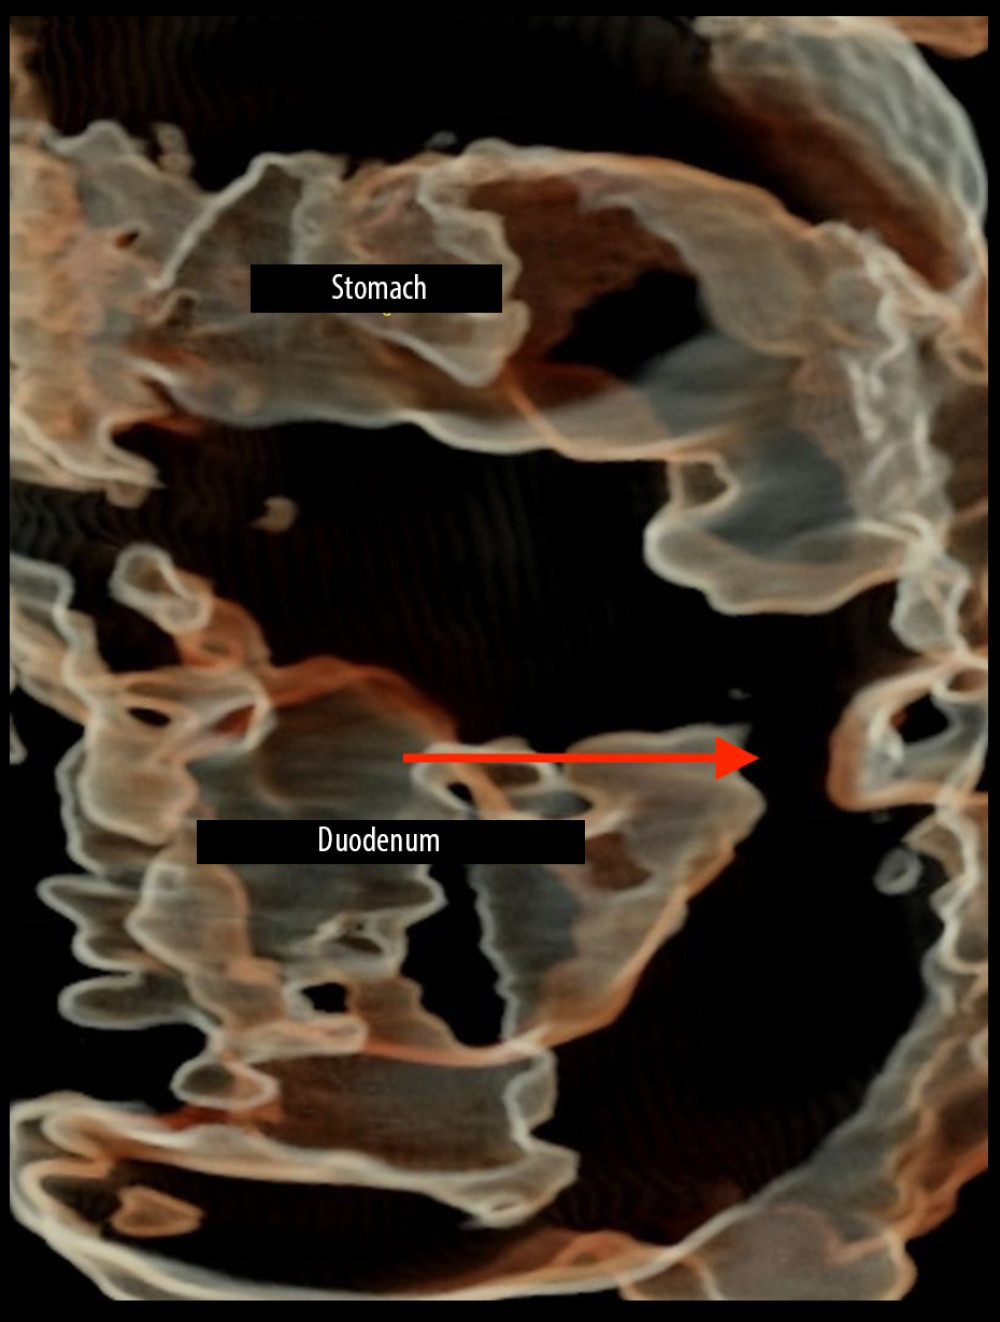 HDlive silhouette image. The interior of a pathologically changed segment of the alimentary tract was visualized, which facilitated the localization of the stenosis using the silhouette function, which shows better contours. Duodenum stenosis and bloated stomach are indicated by red arrow.